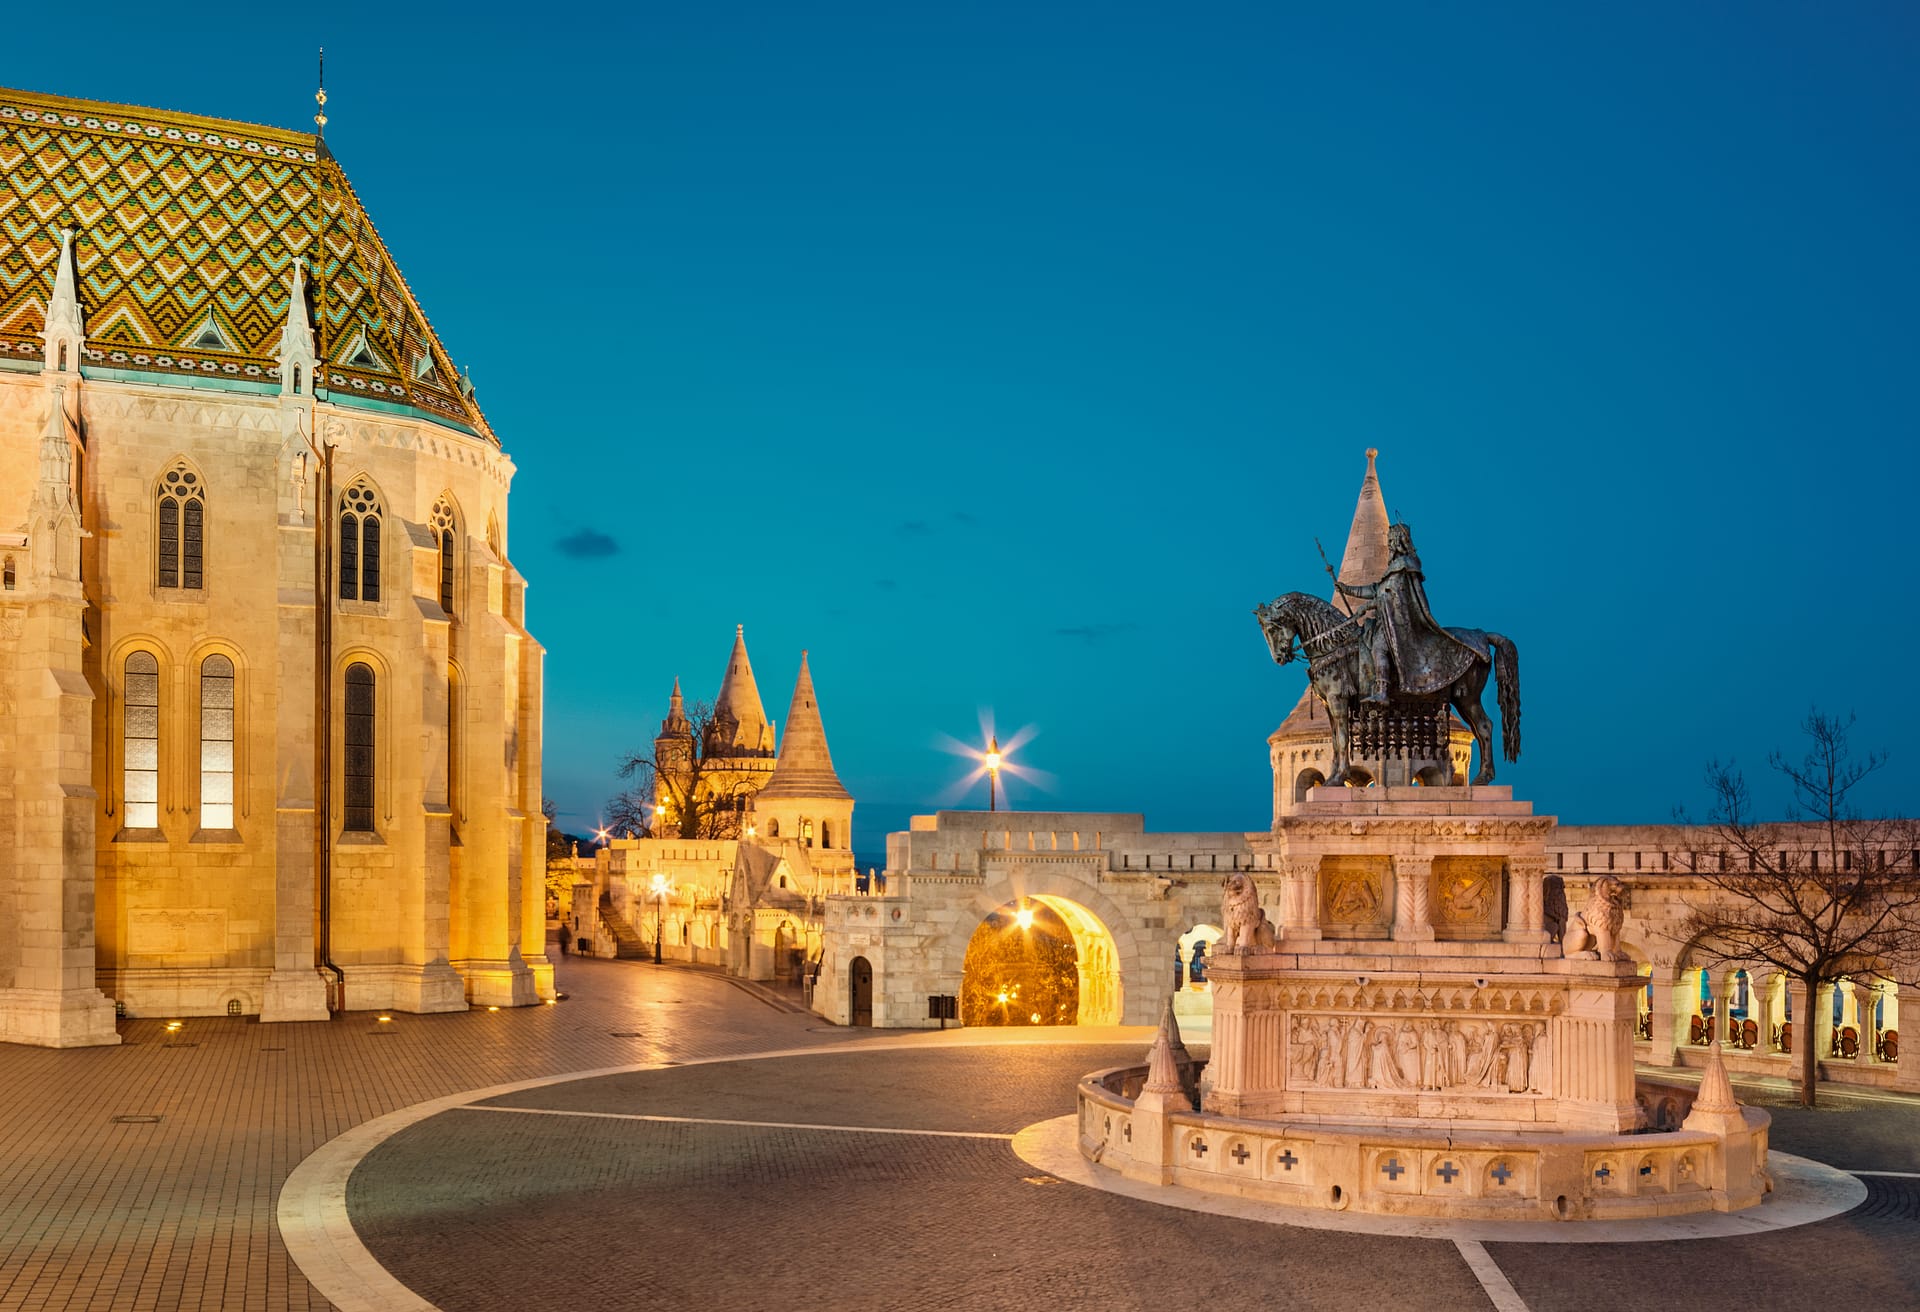 Fishermans Bastion in Budapest, Hungary in the evening. Focus on the horseman statue.